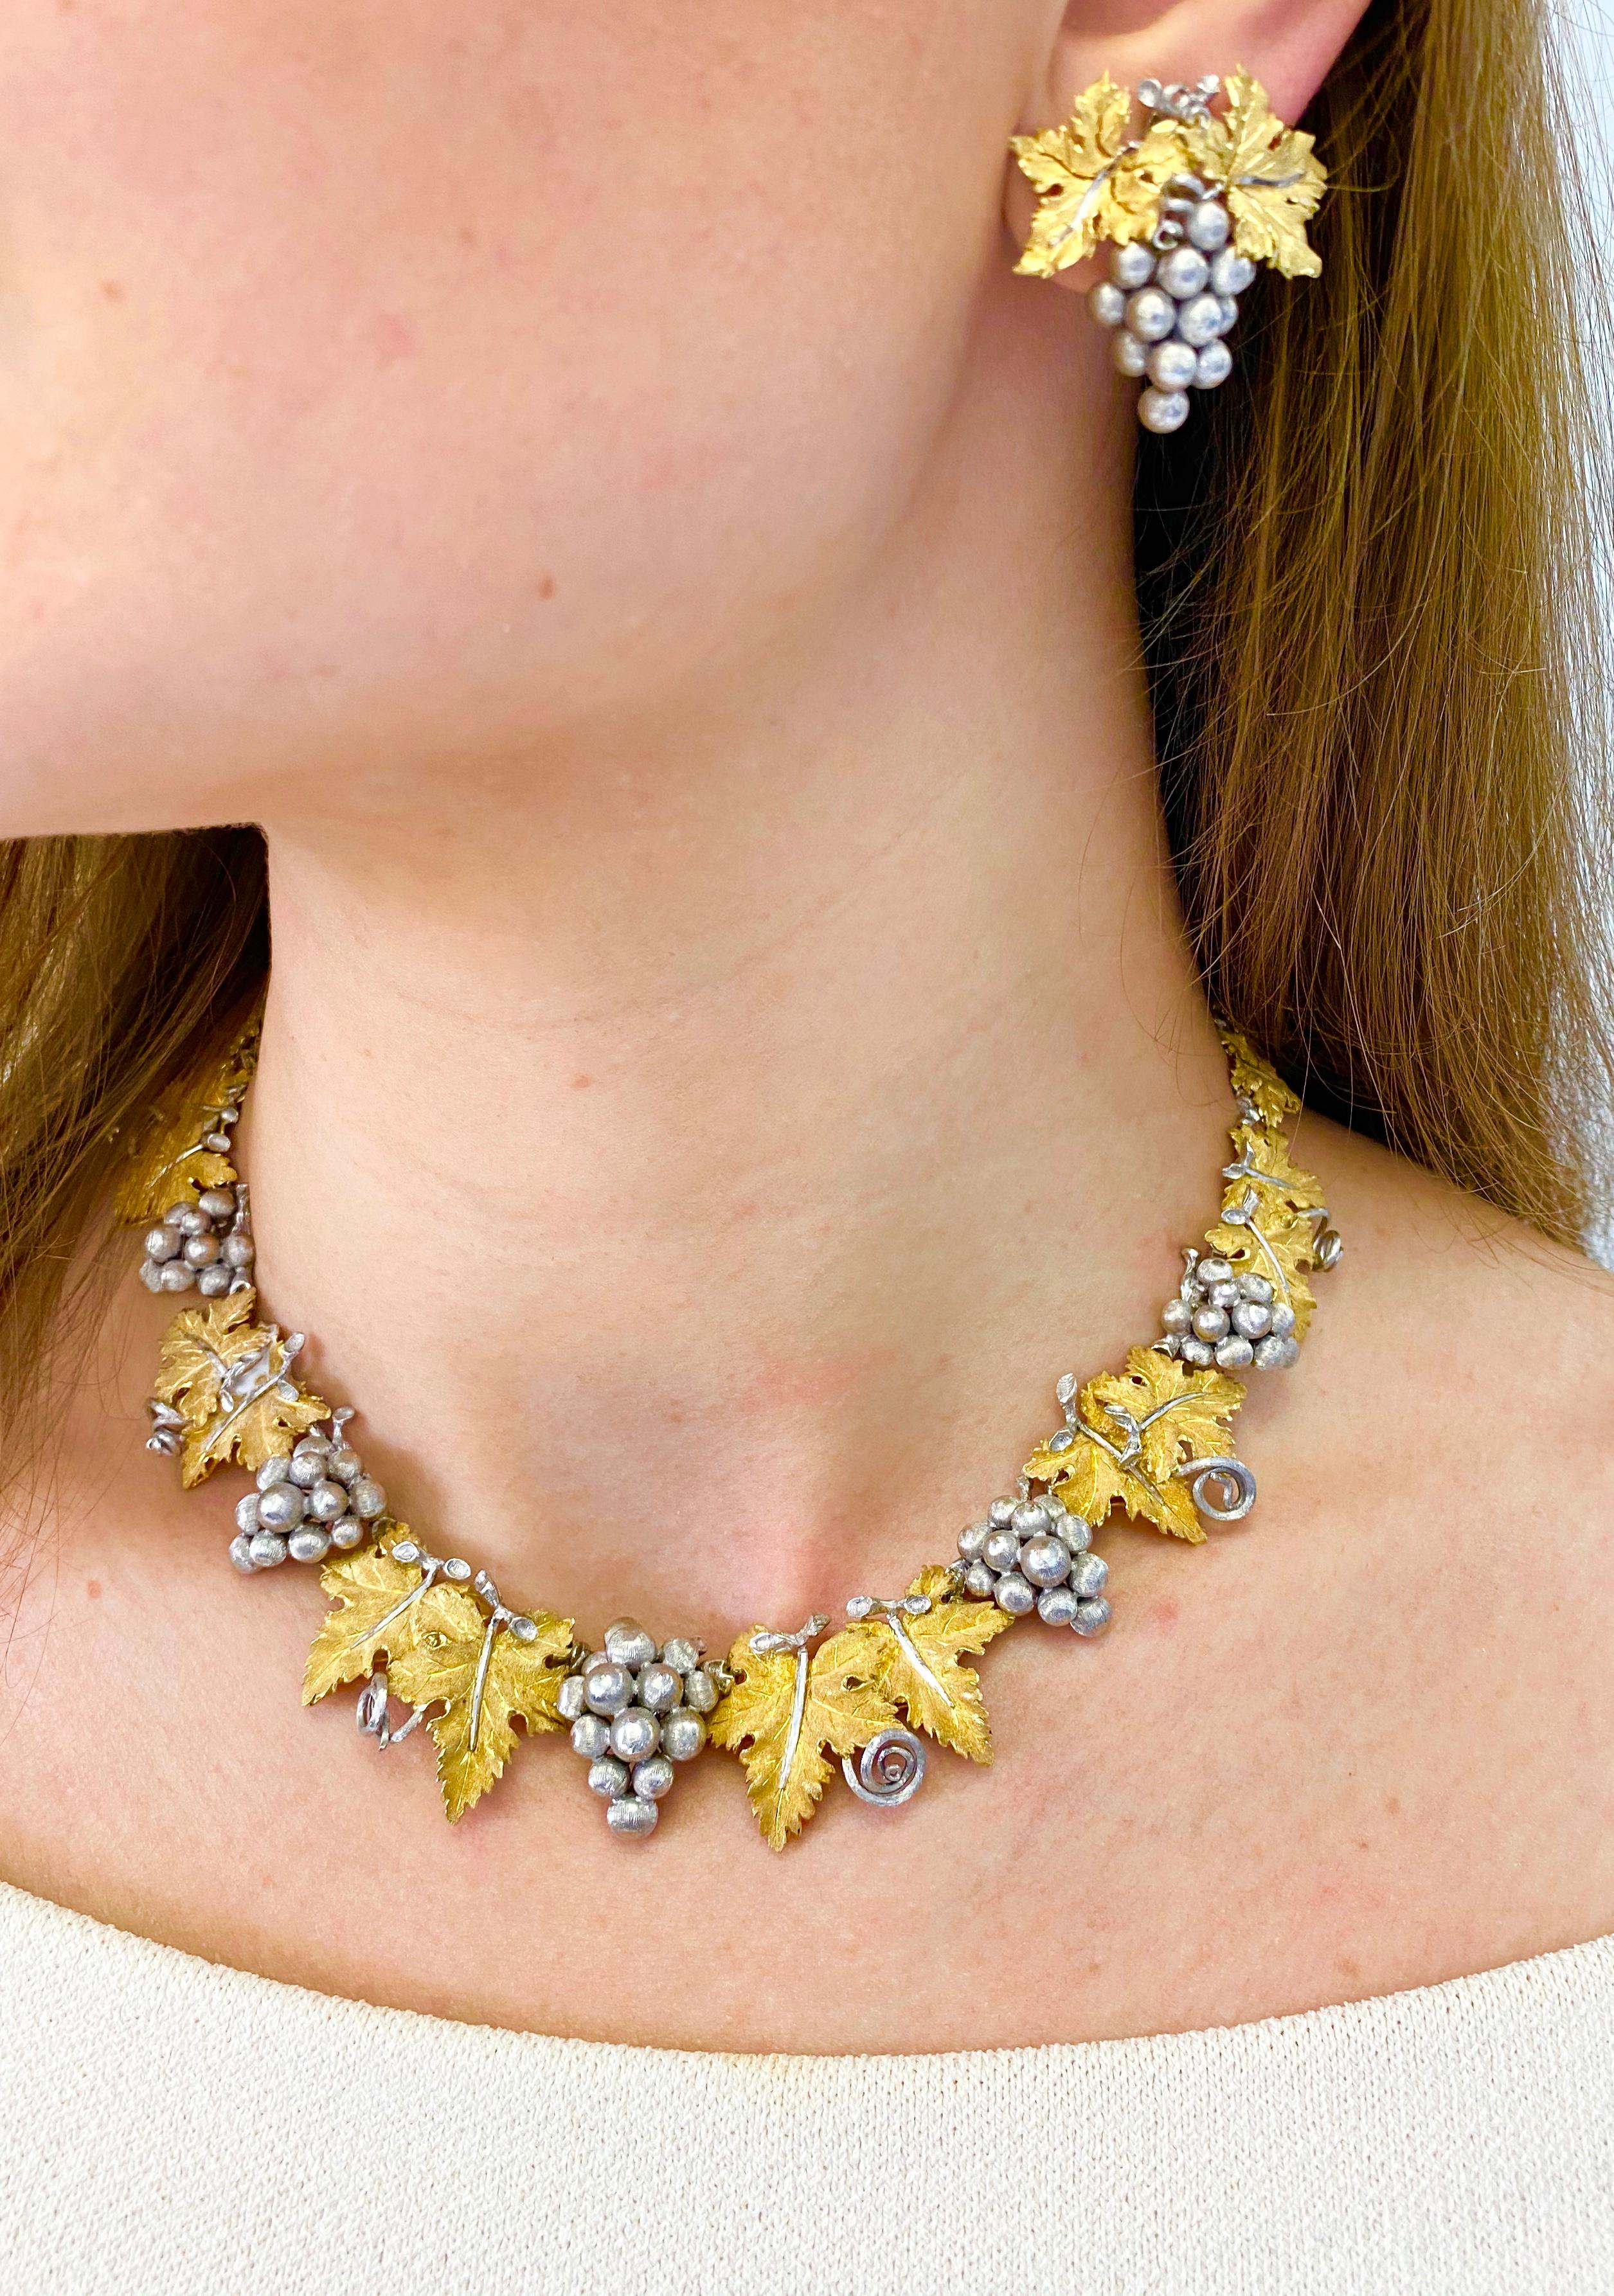 Buccellati  Necklace and Earrings Set.  with yellow gold leafs and a cluster of grape in white gold. 
18k gold 
Necklace  Length is 15.5 inches. Total gold is 90 grams
Signed Gianmaria Buccellati, Maker's Mark, Italy, X3182.